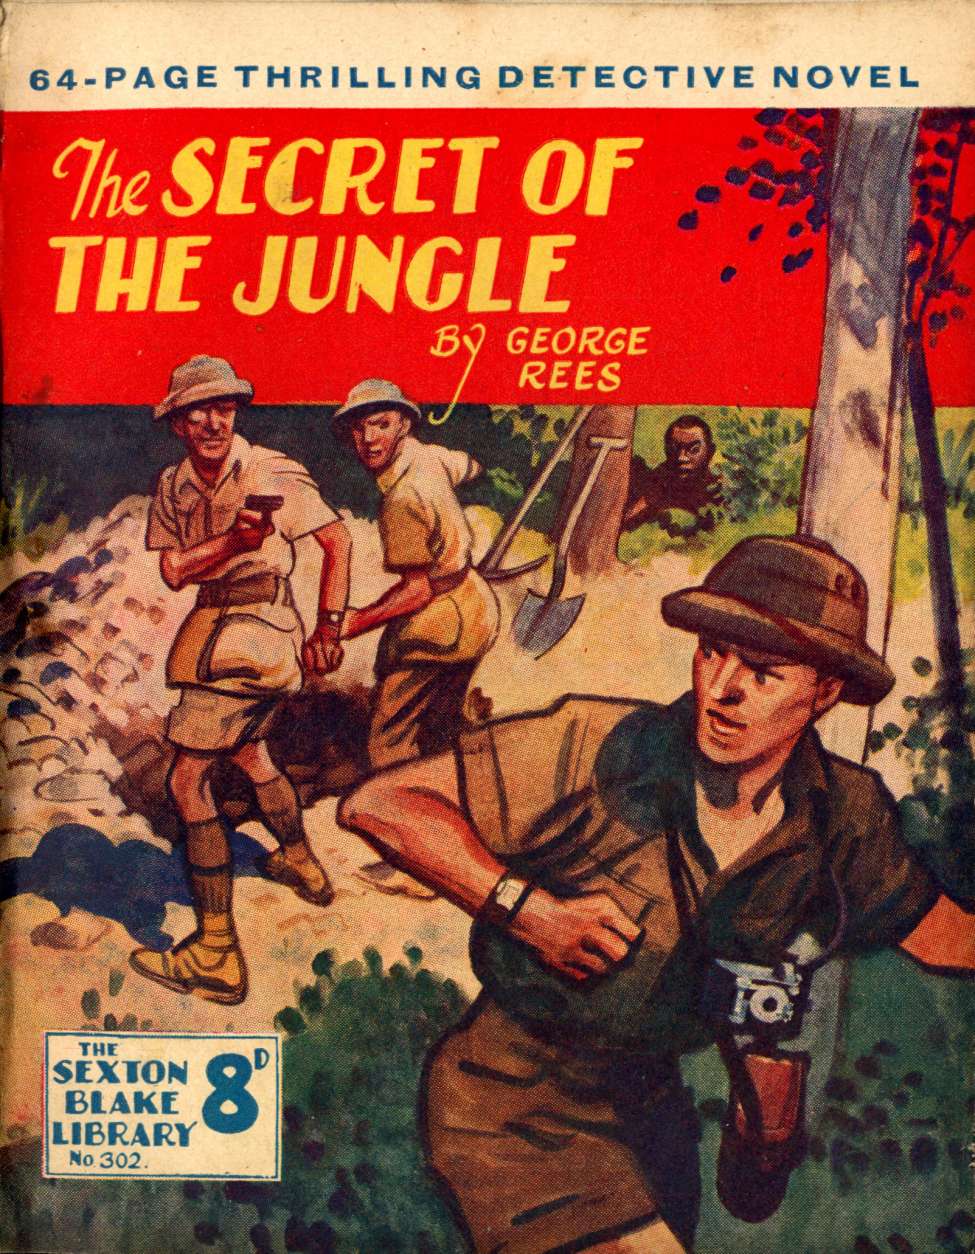 Comic Book Cover For Sexton Blake Library S3 302 - The Secret of the Jungle